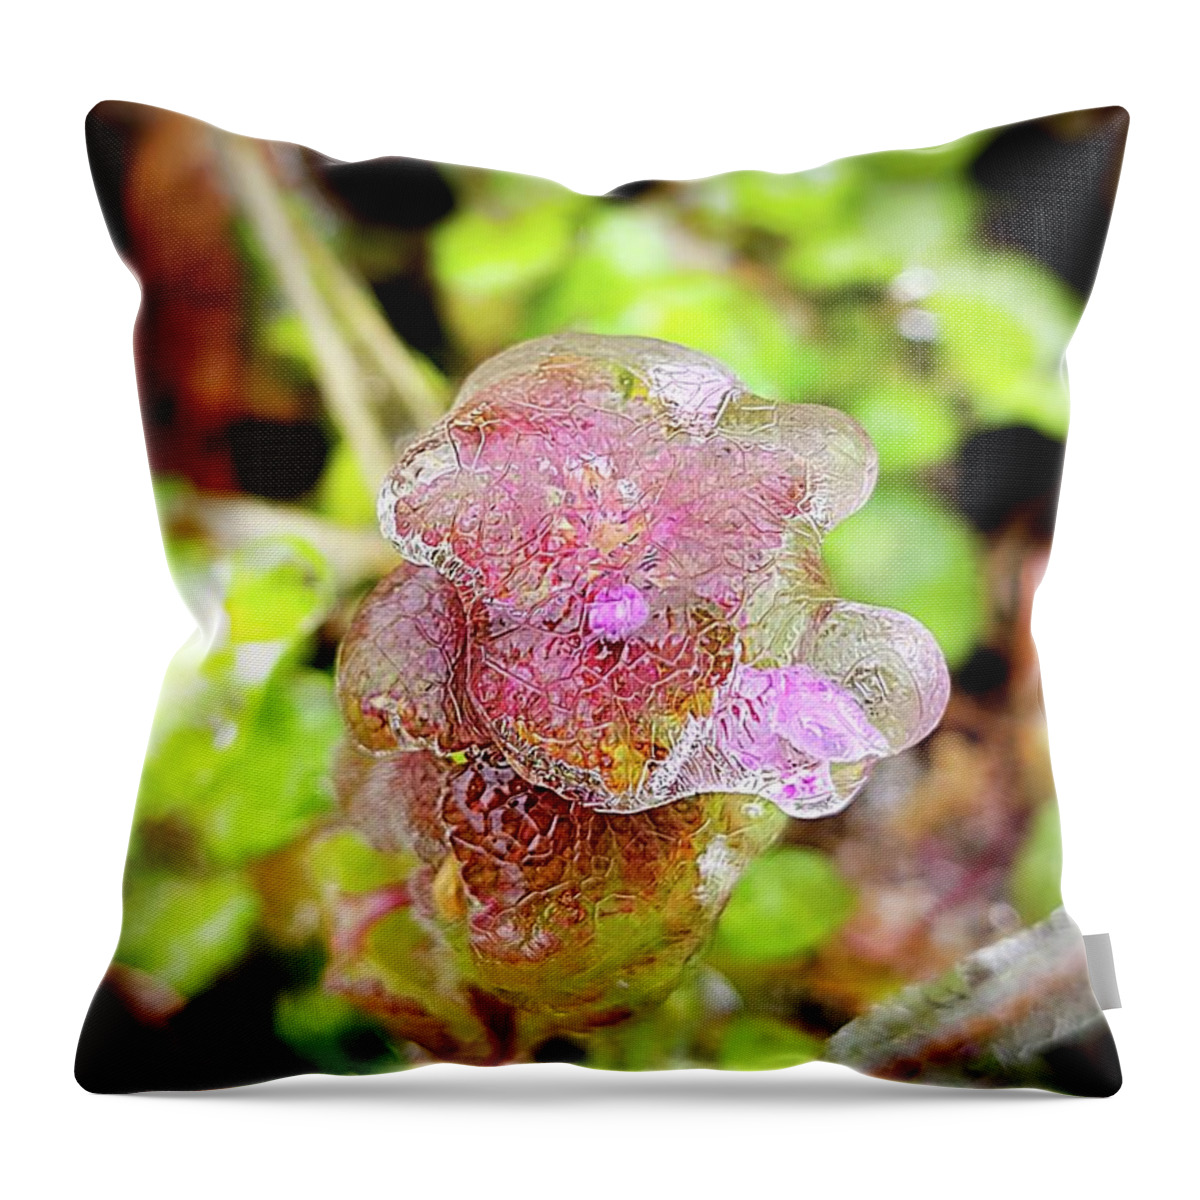 Ice Storm Throw Pillow featuring the photograph Icy Purple Deadnettle by Ally White